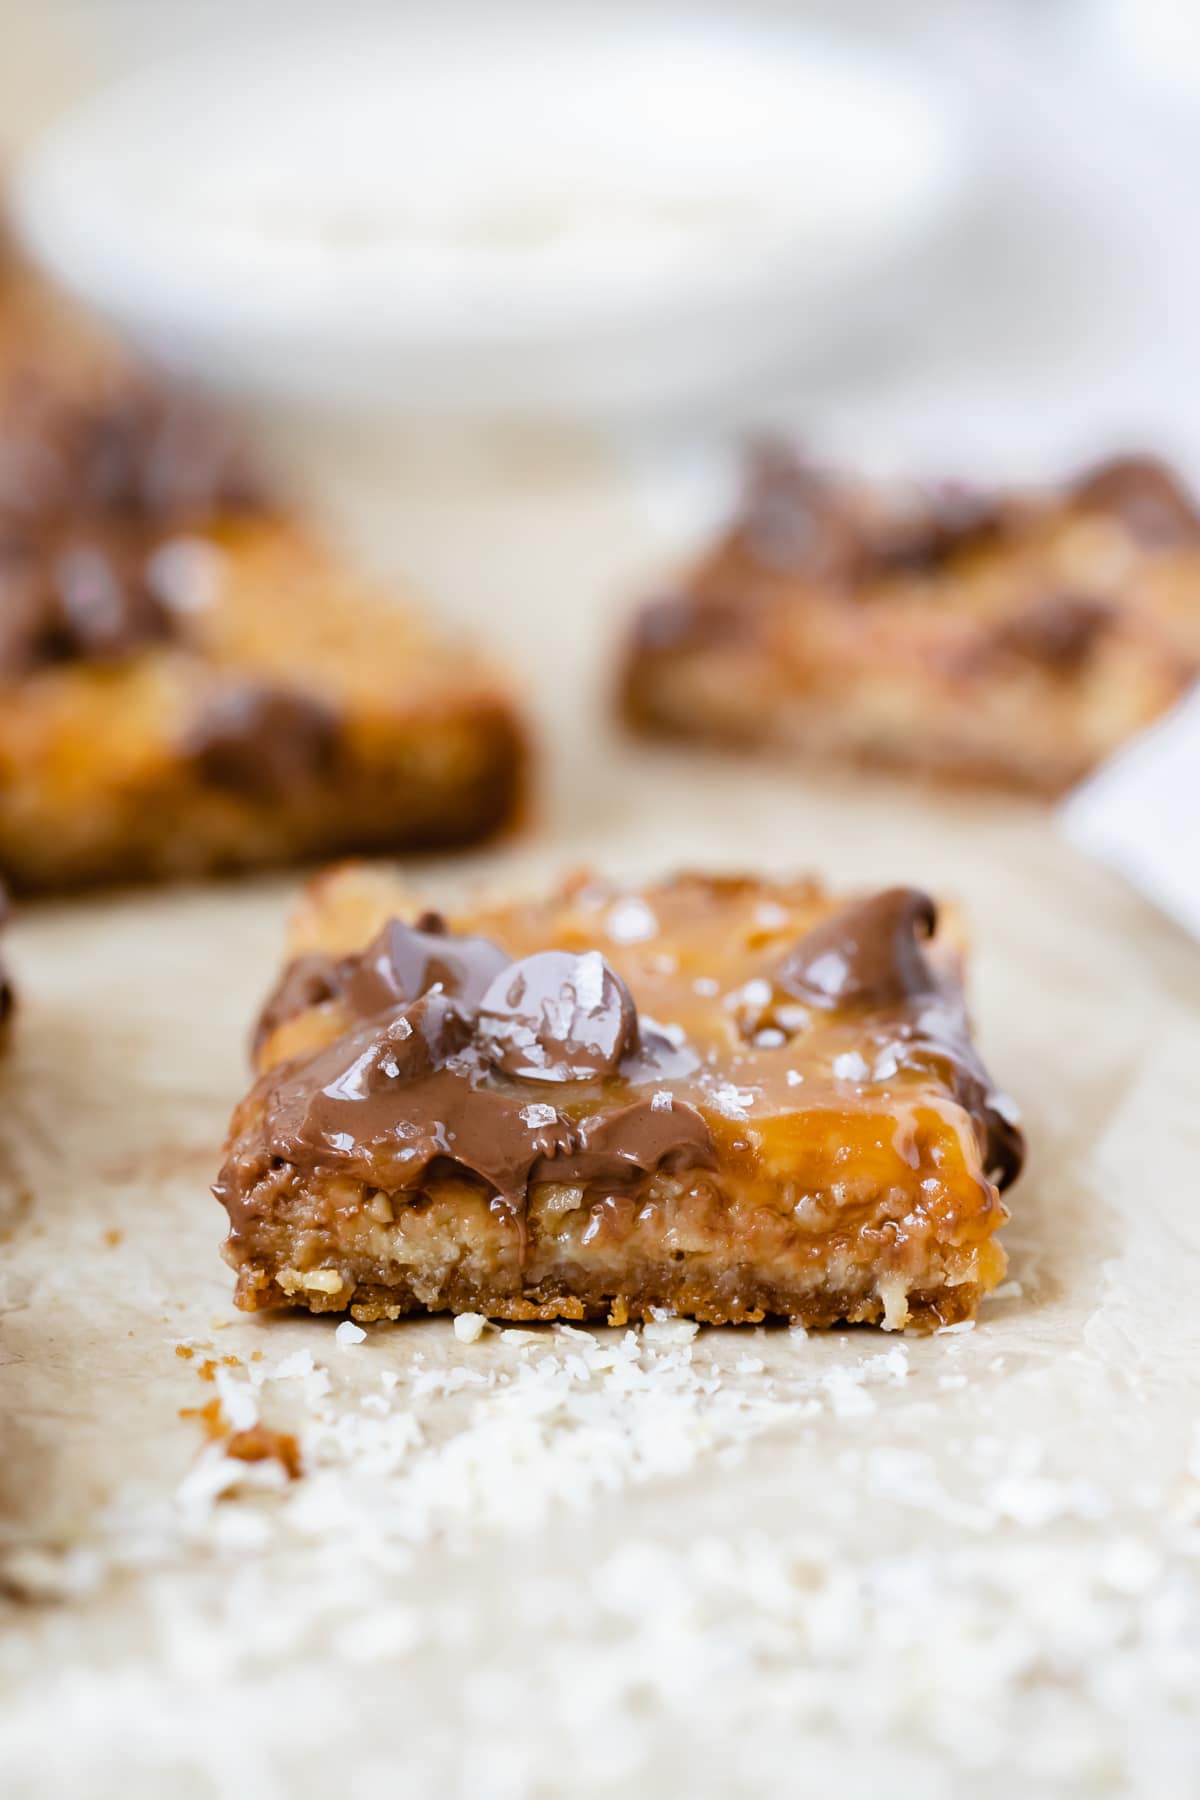 freshly baked caramel bar topped with chocolate chips and flaky sea salt
